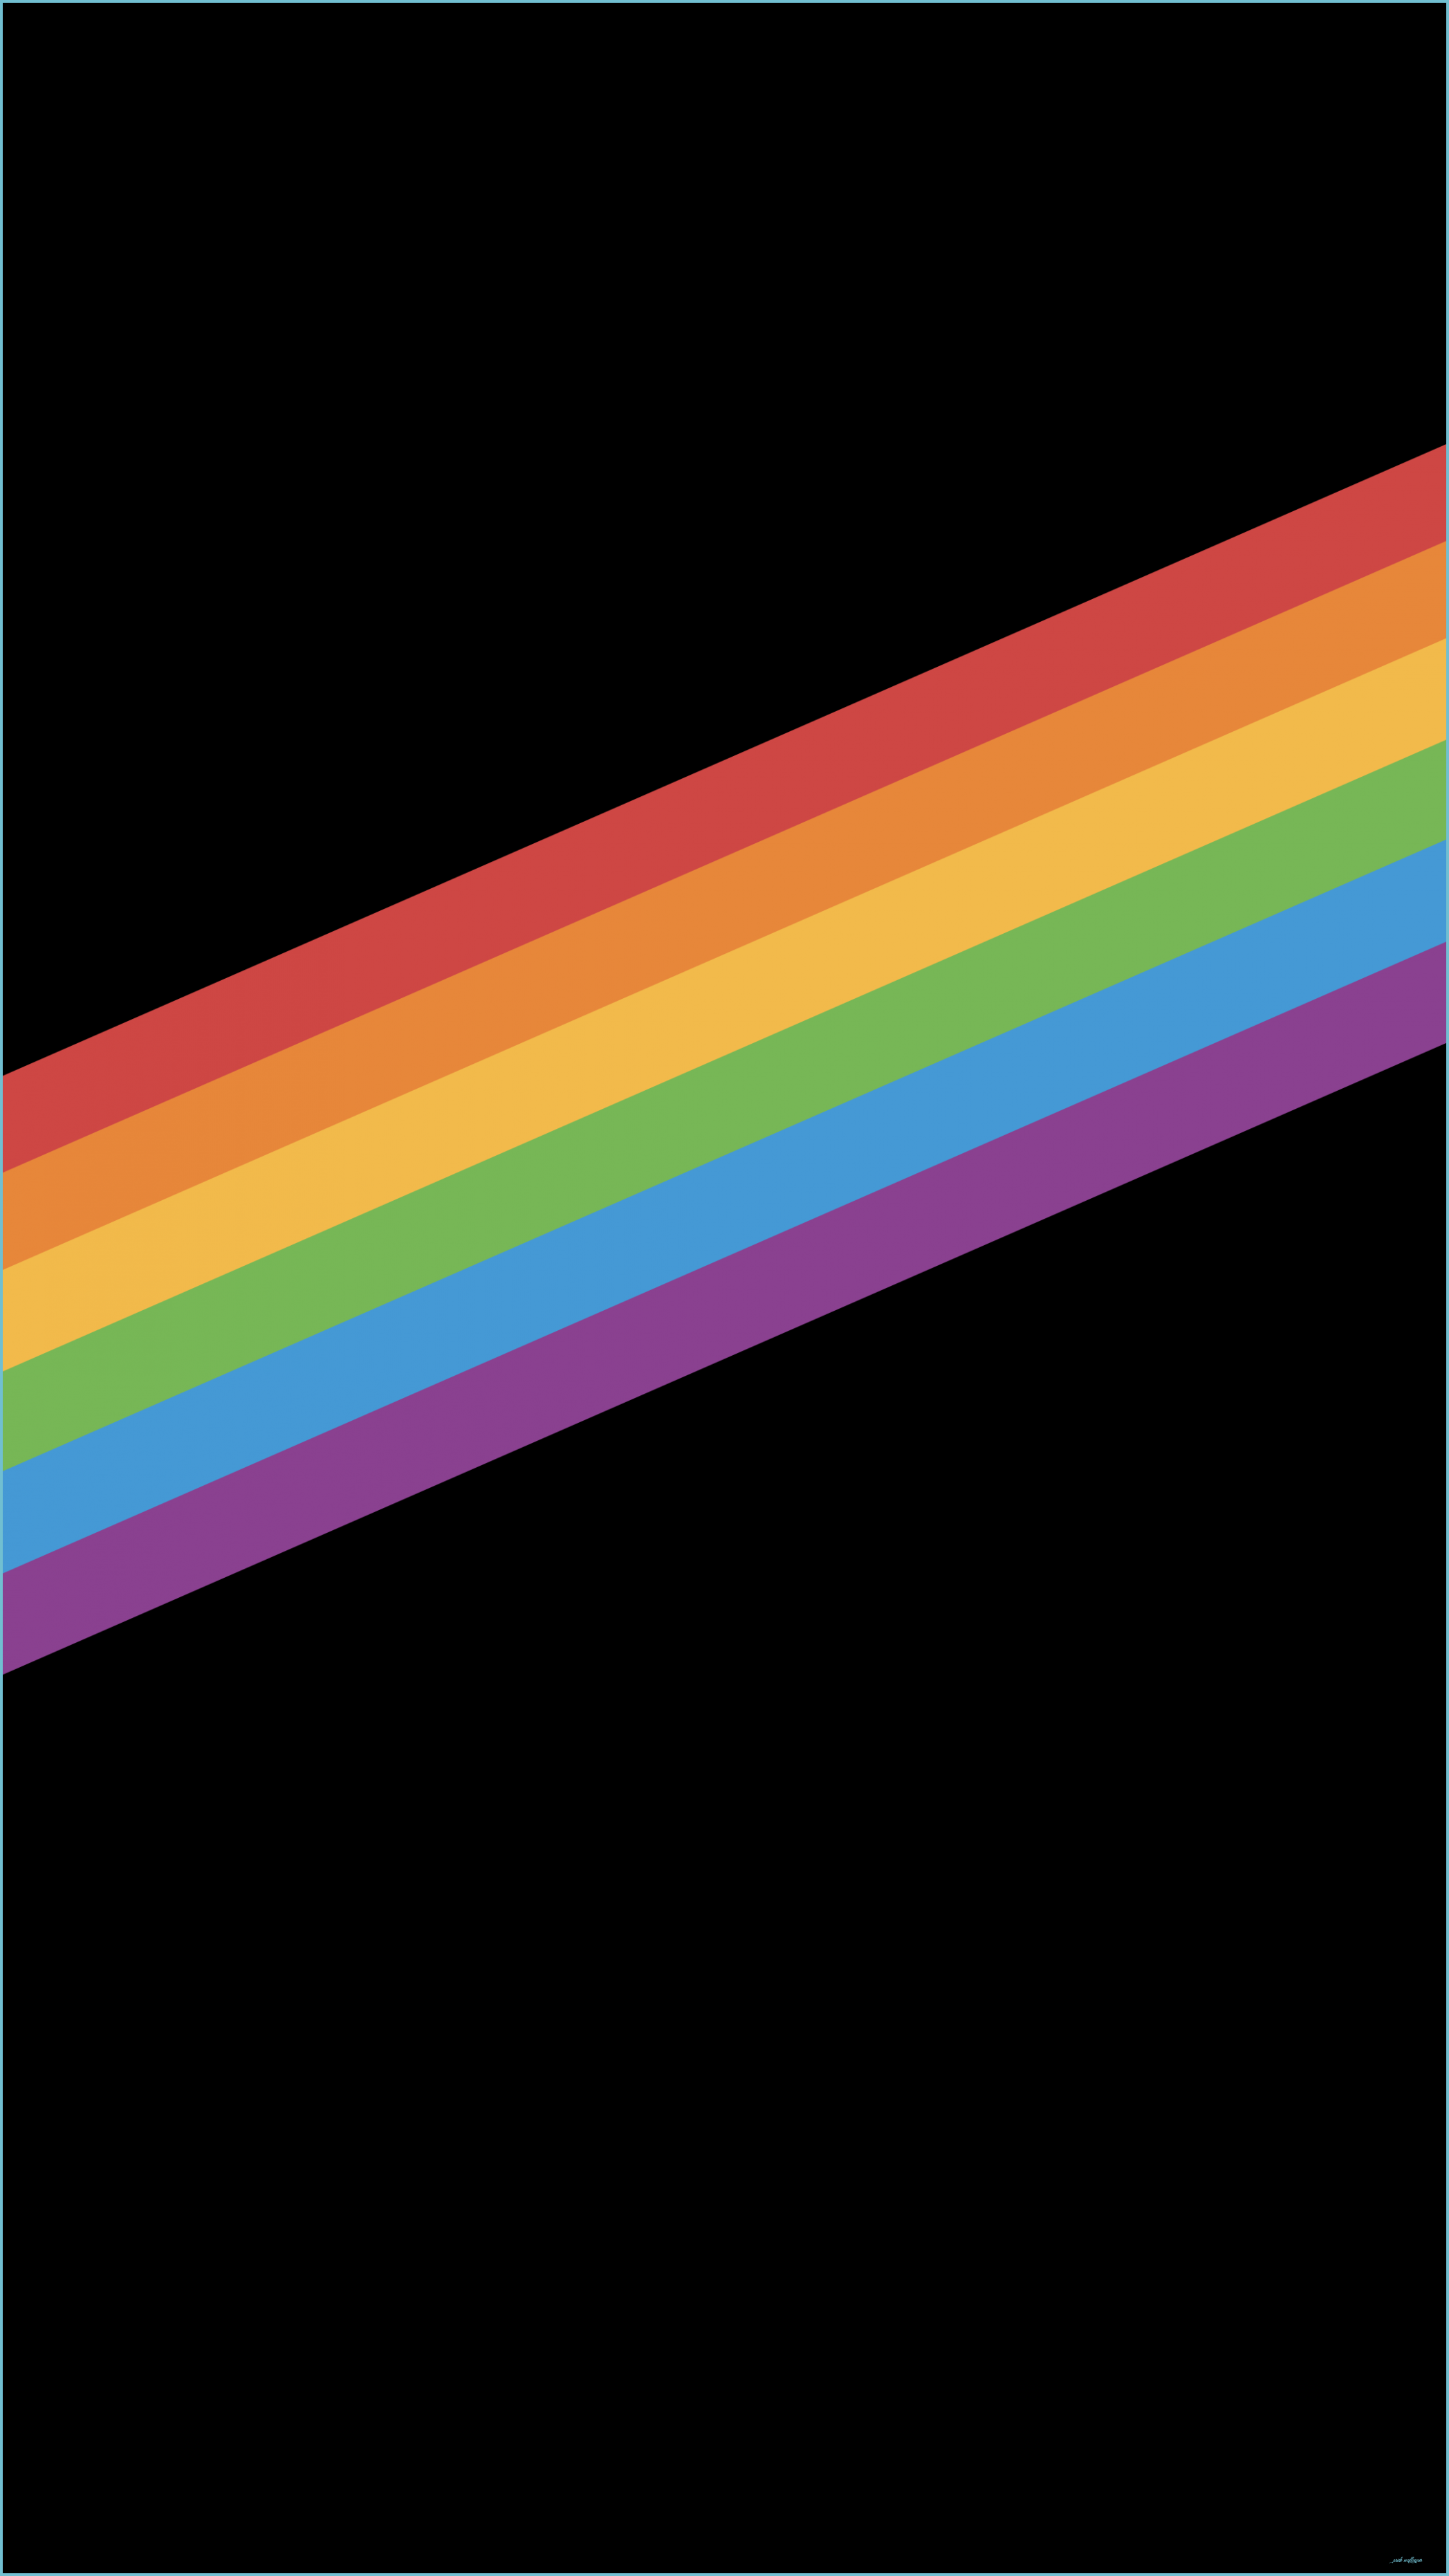 Picture Made This Simple Pride Phone Wallpaper Back In June Based